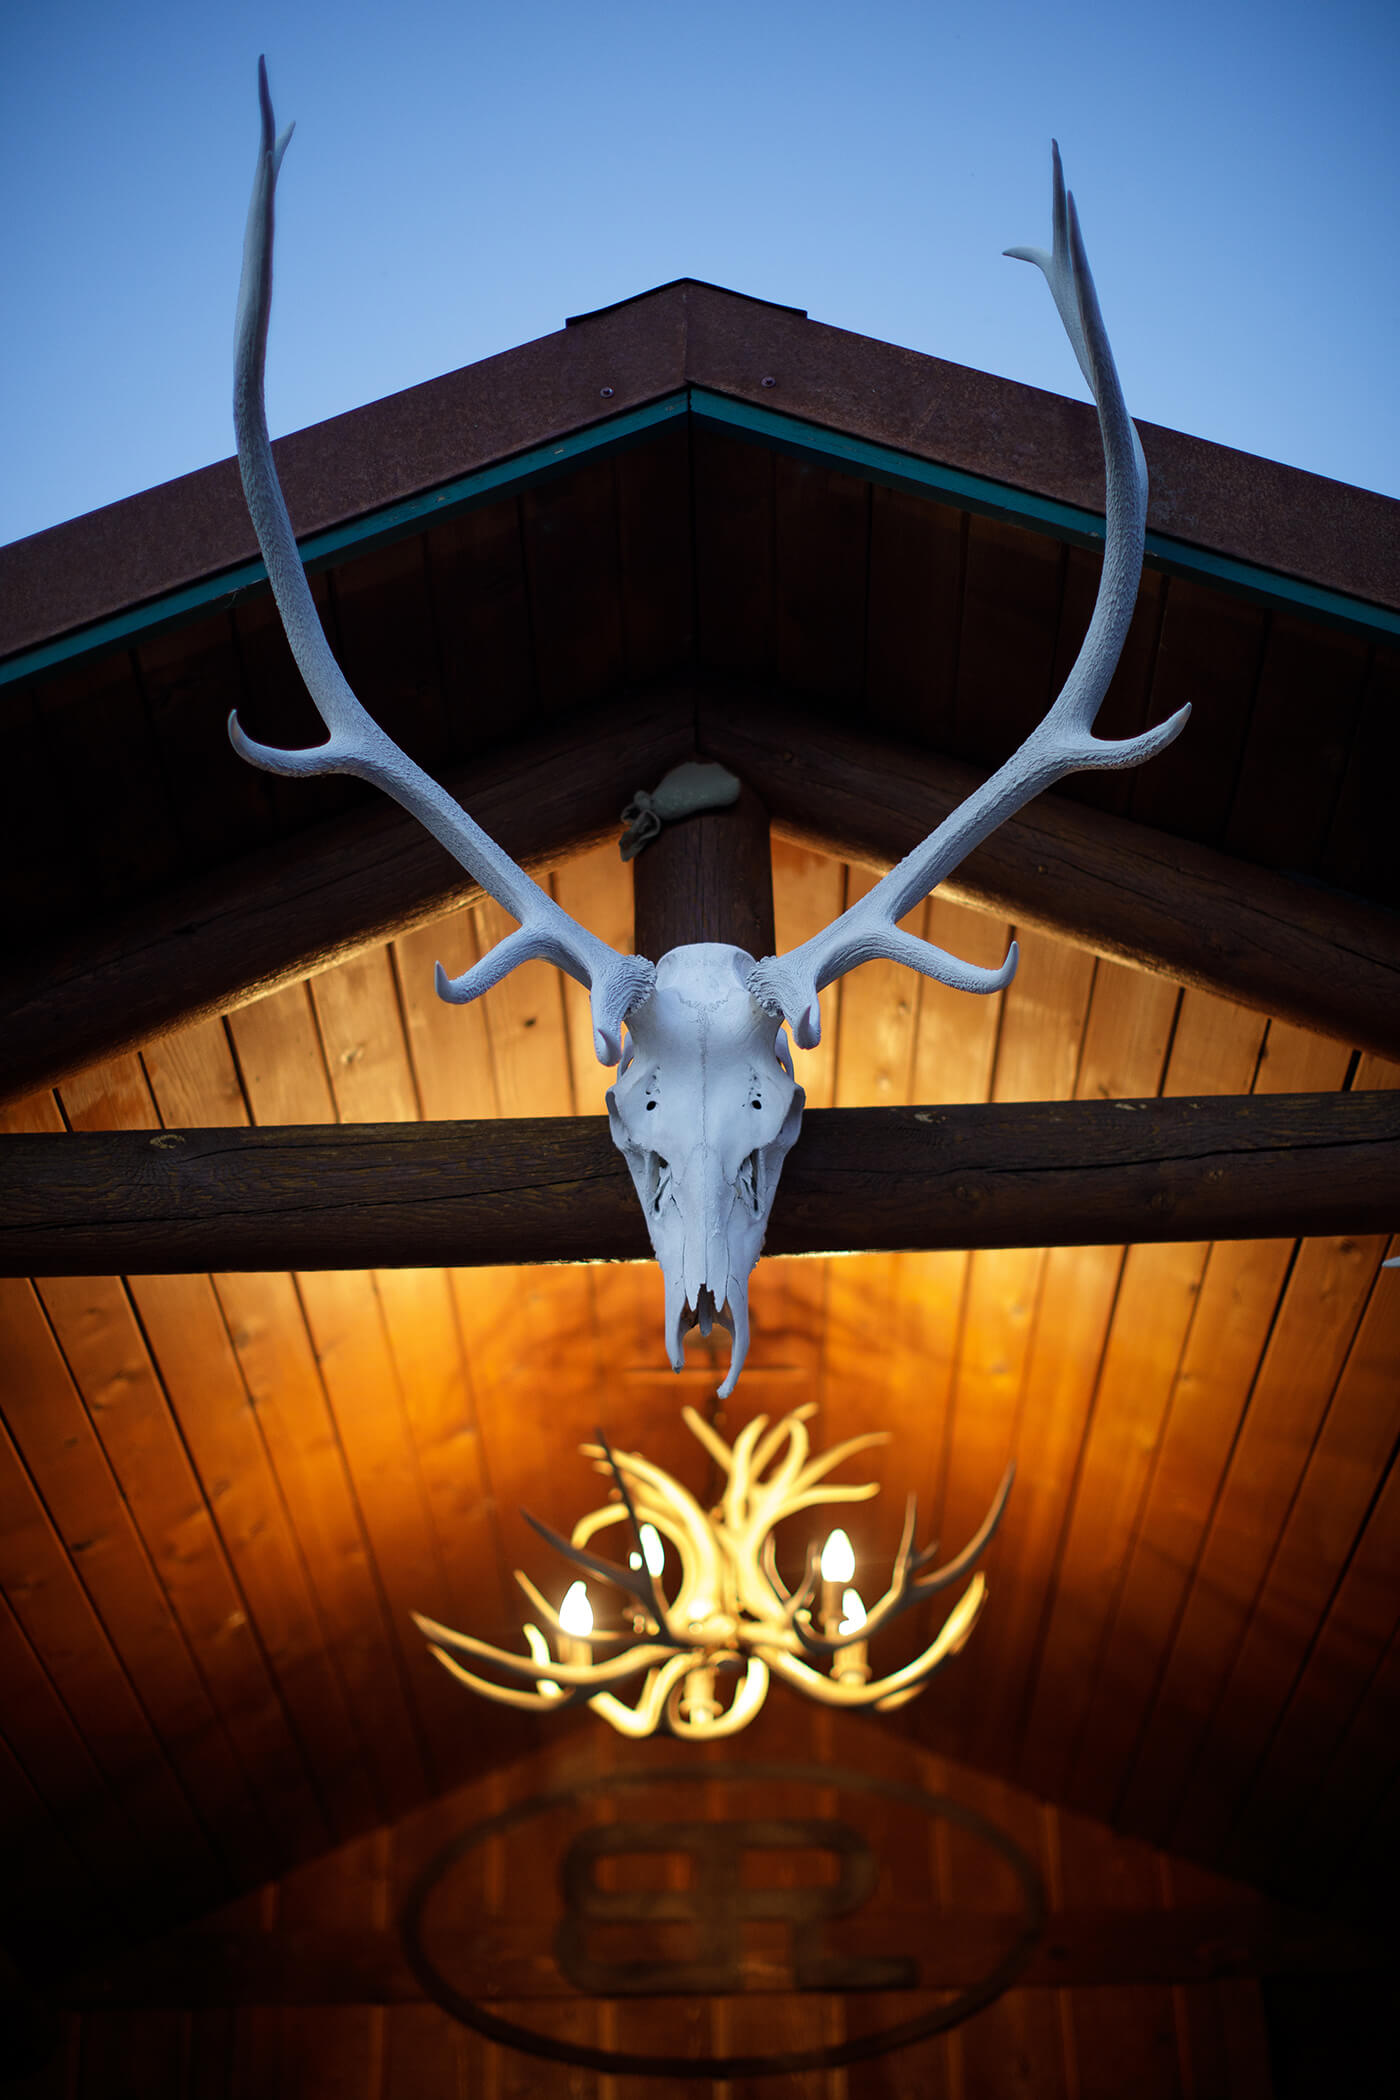 Accommodating atmosphere of bighorn river lodge